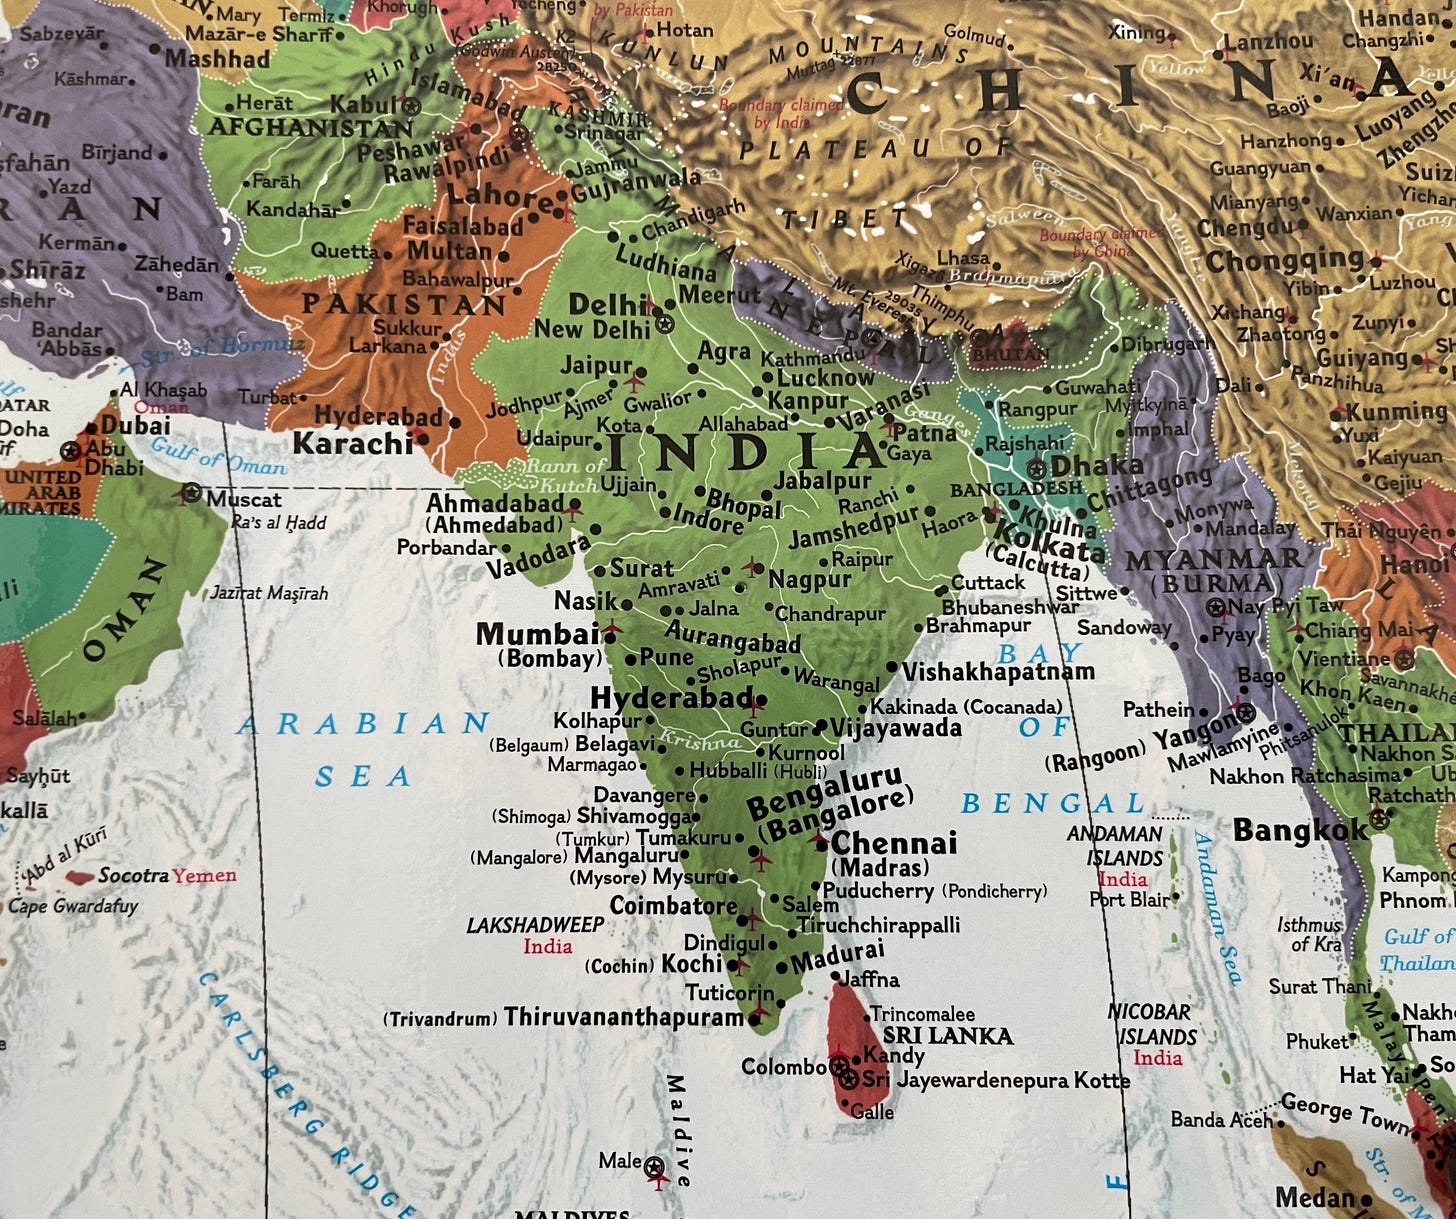 A map of the world, zoomed in on India, shown in green. Other countries are shown in blue, red, orange, green, purple, and yellow.